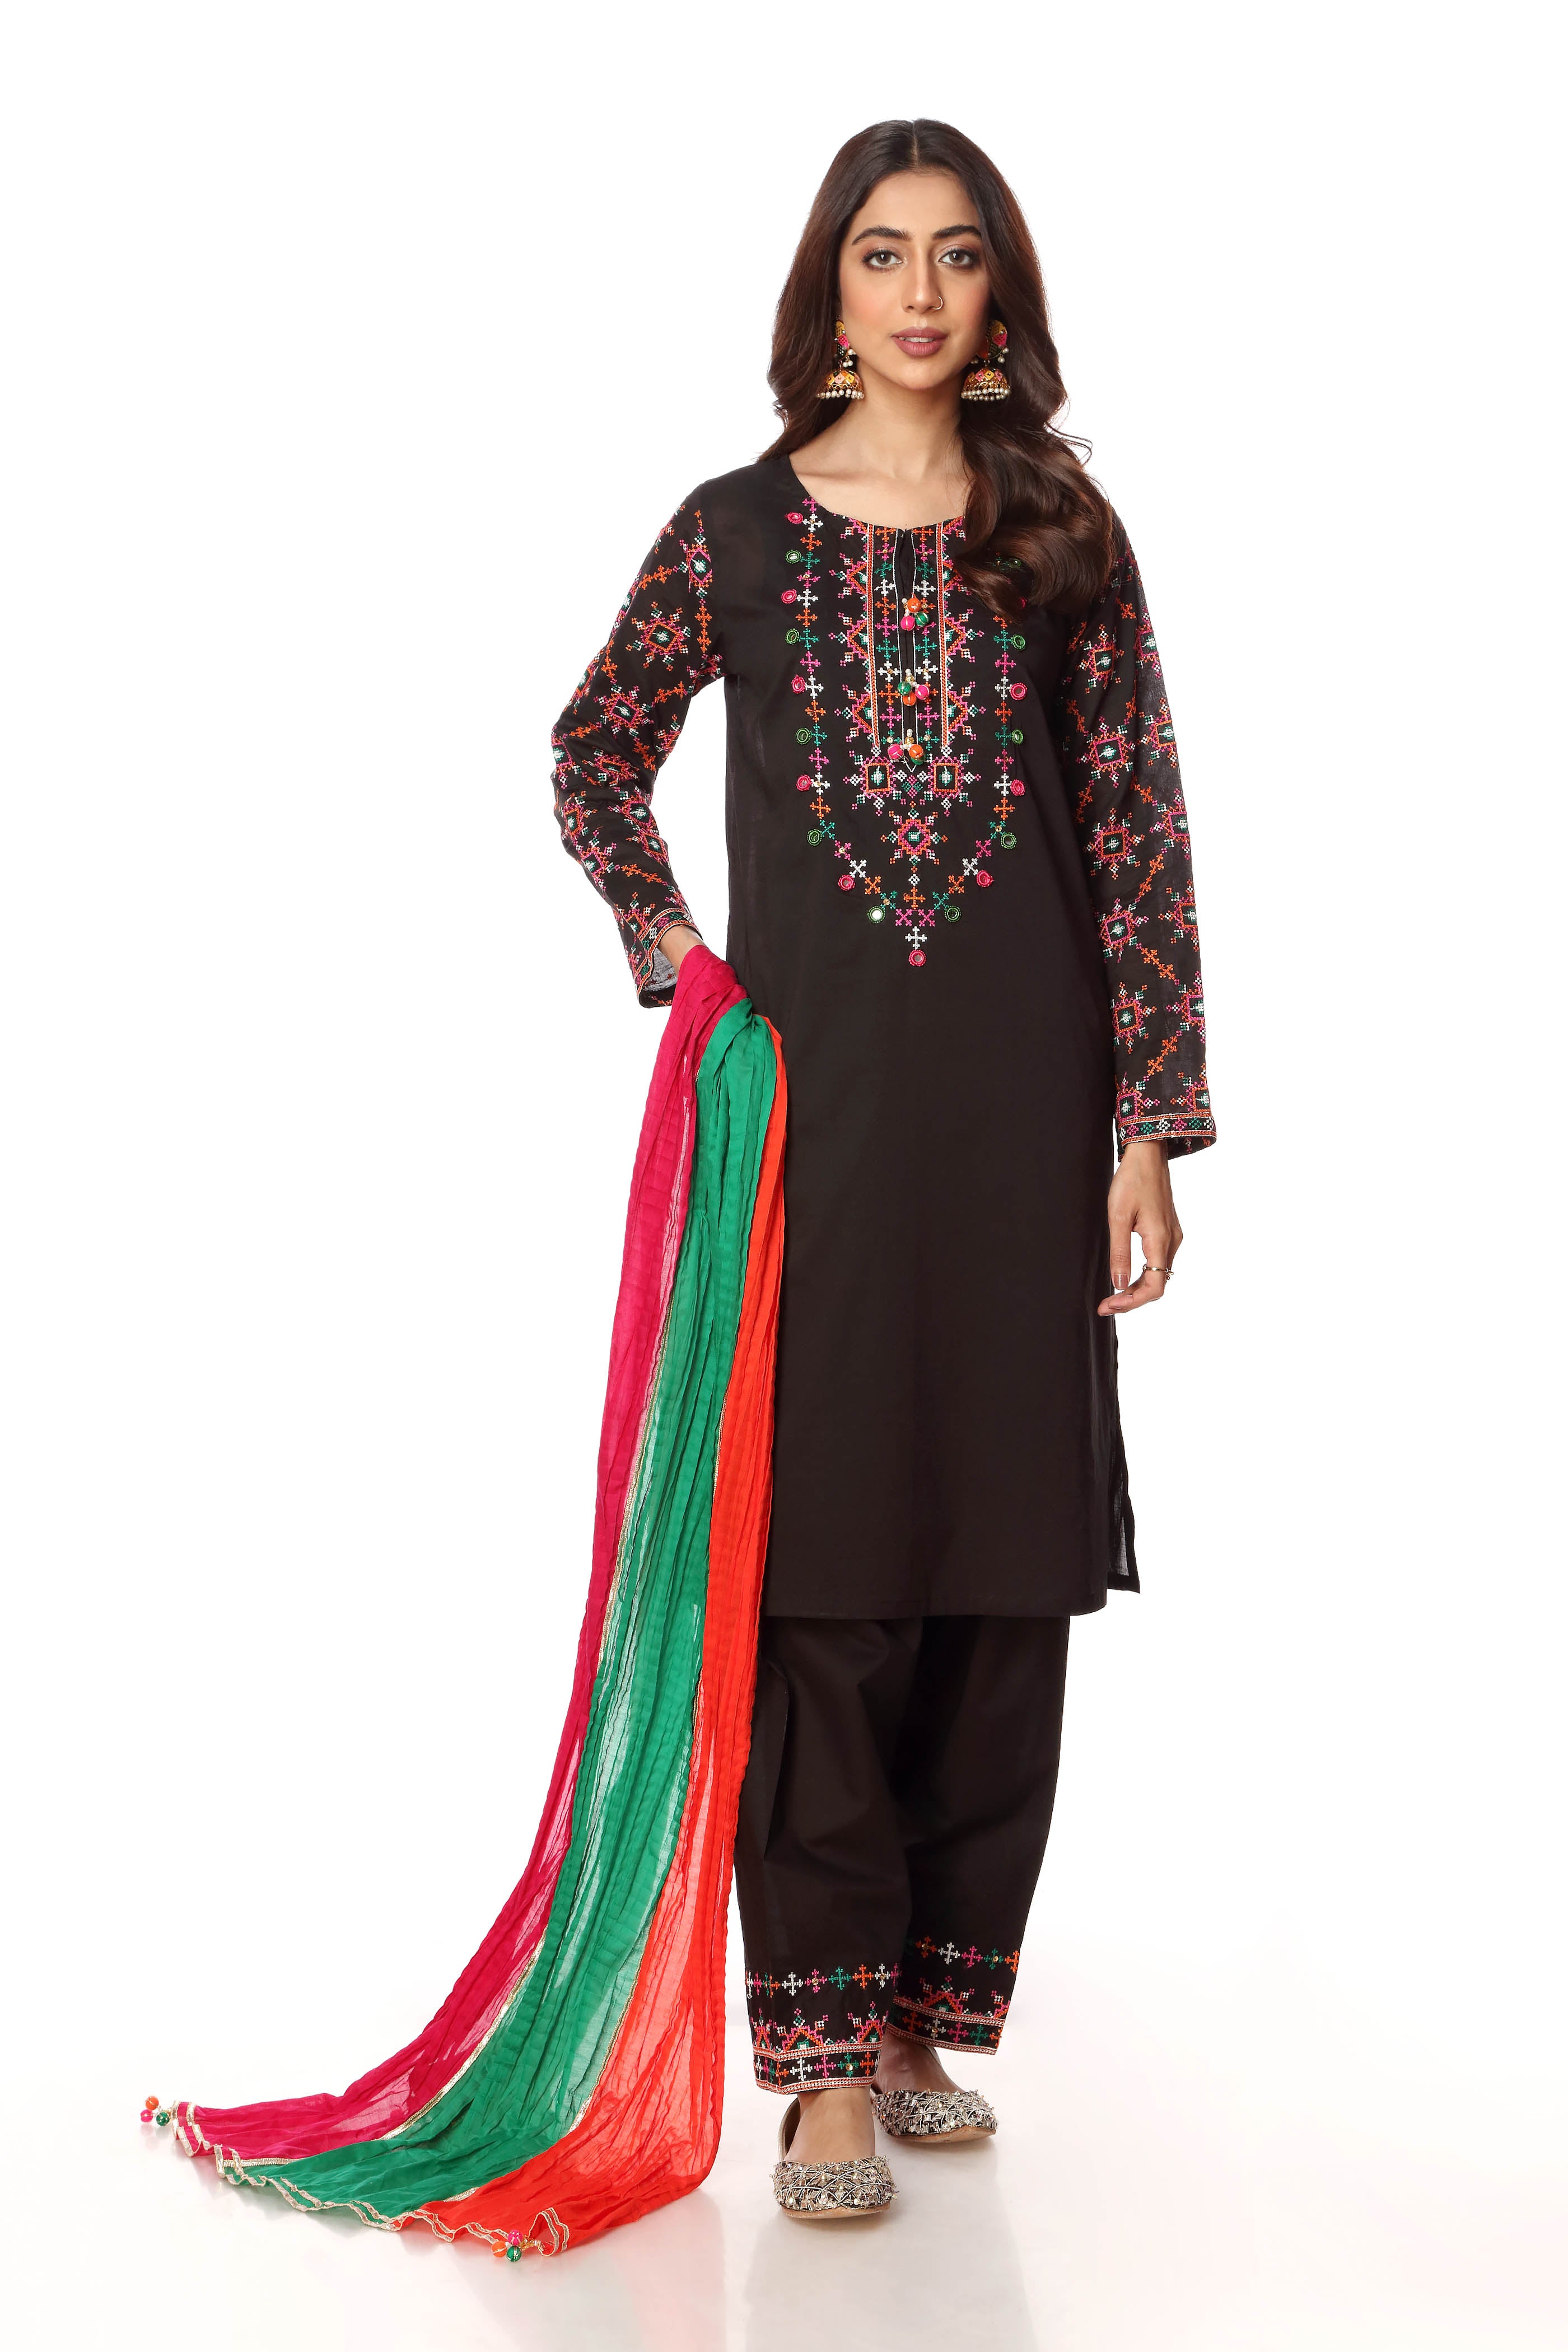 Embroidered Sleeve in Black coloured Printed Lawn fabric